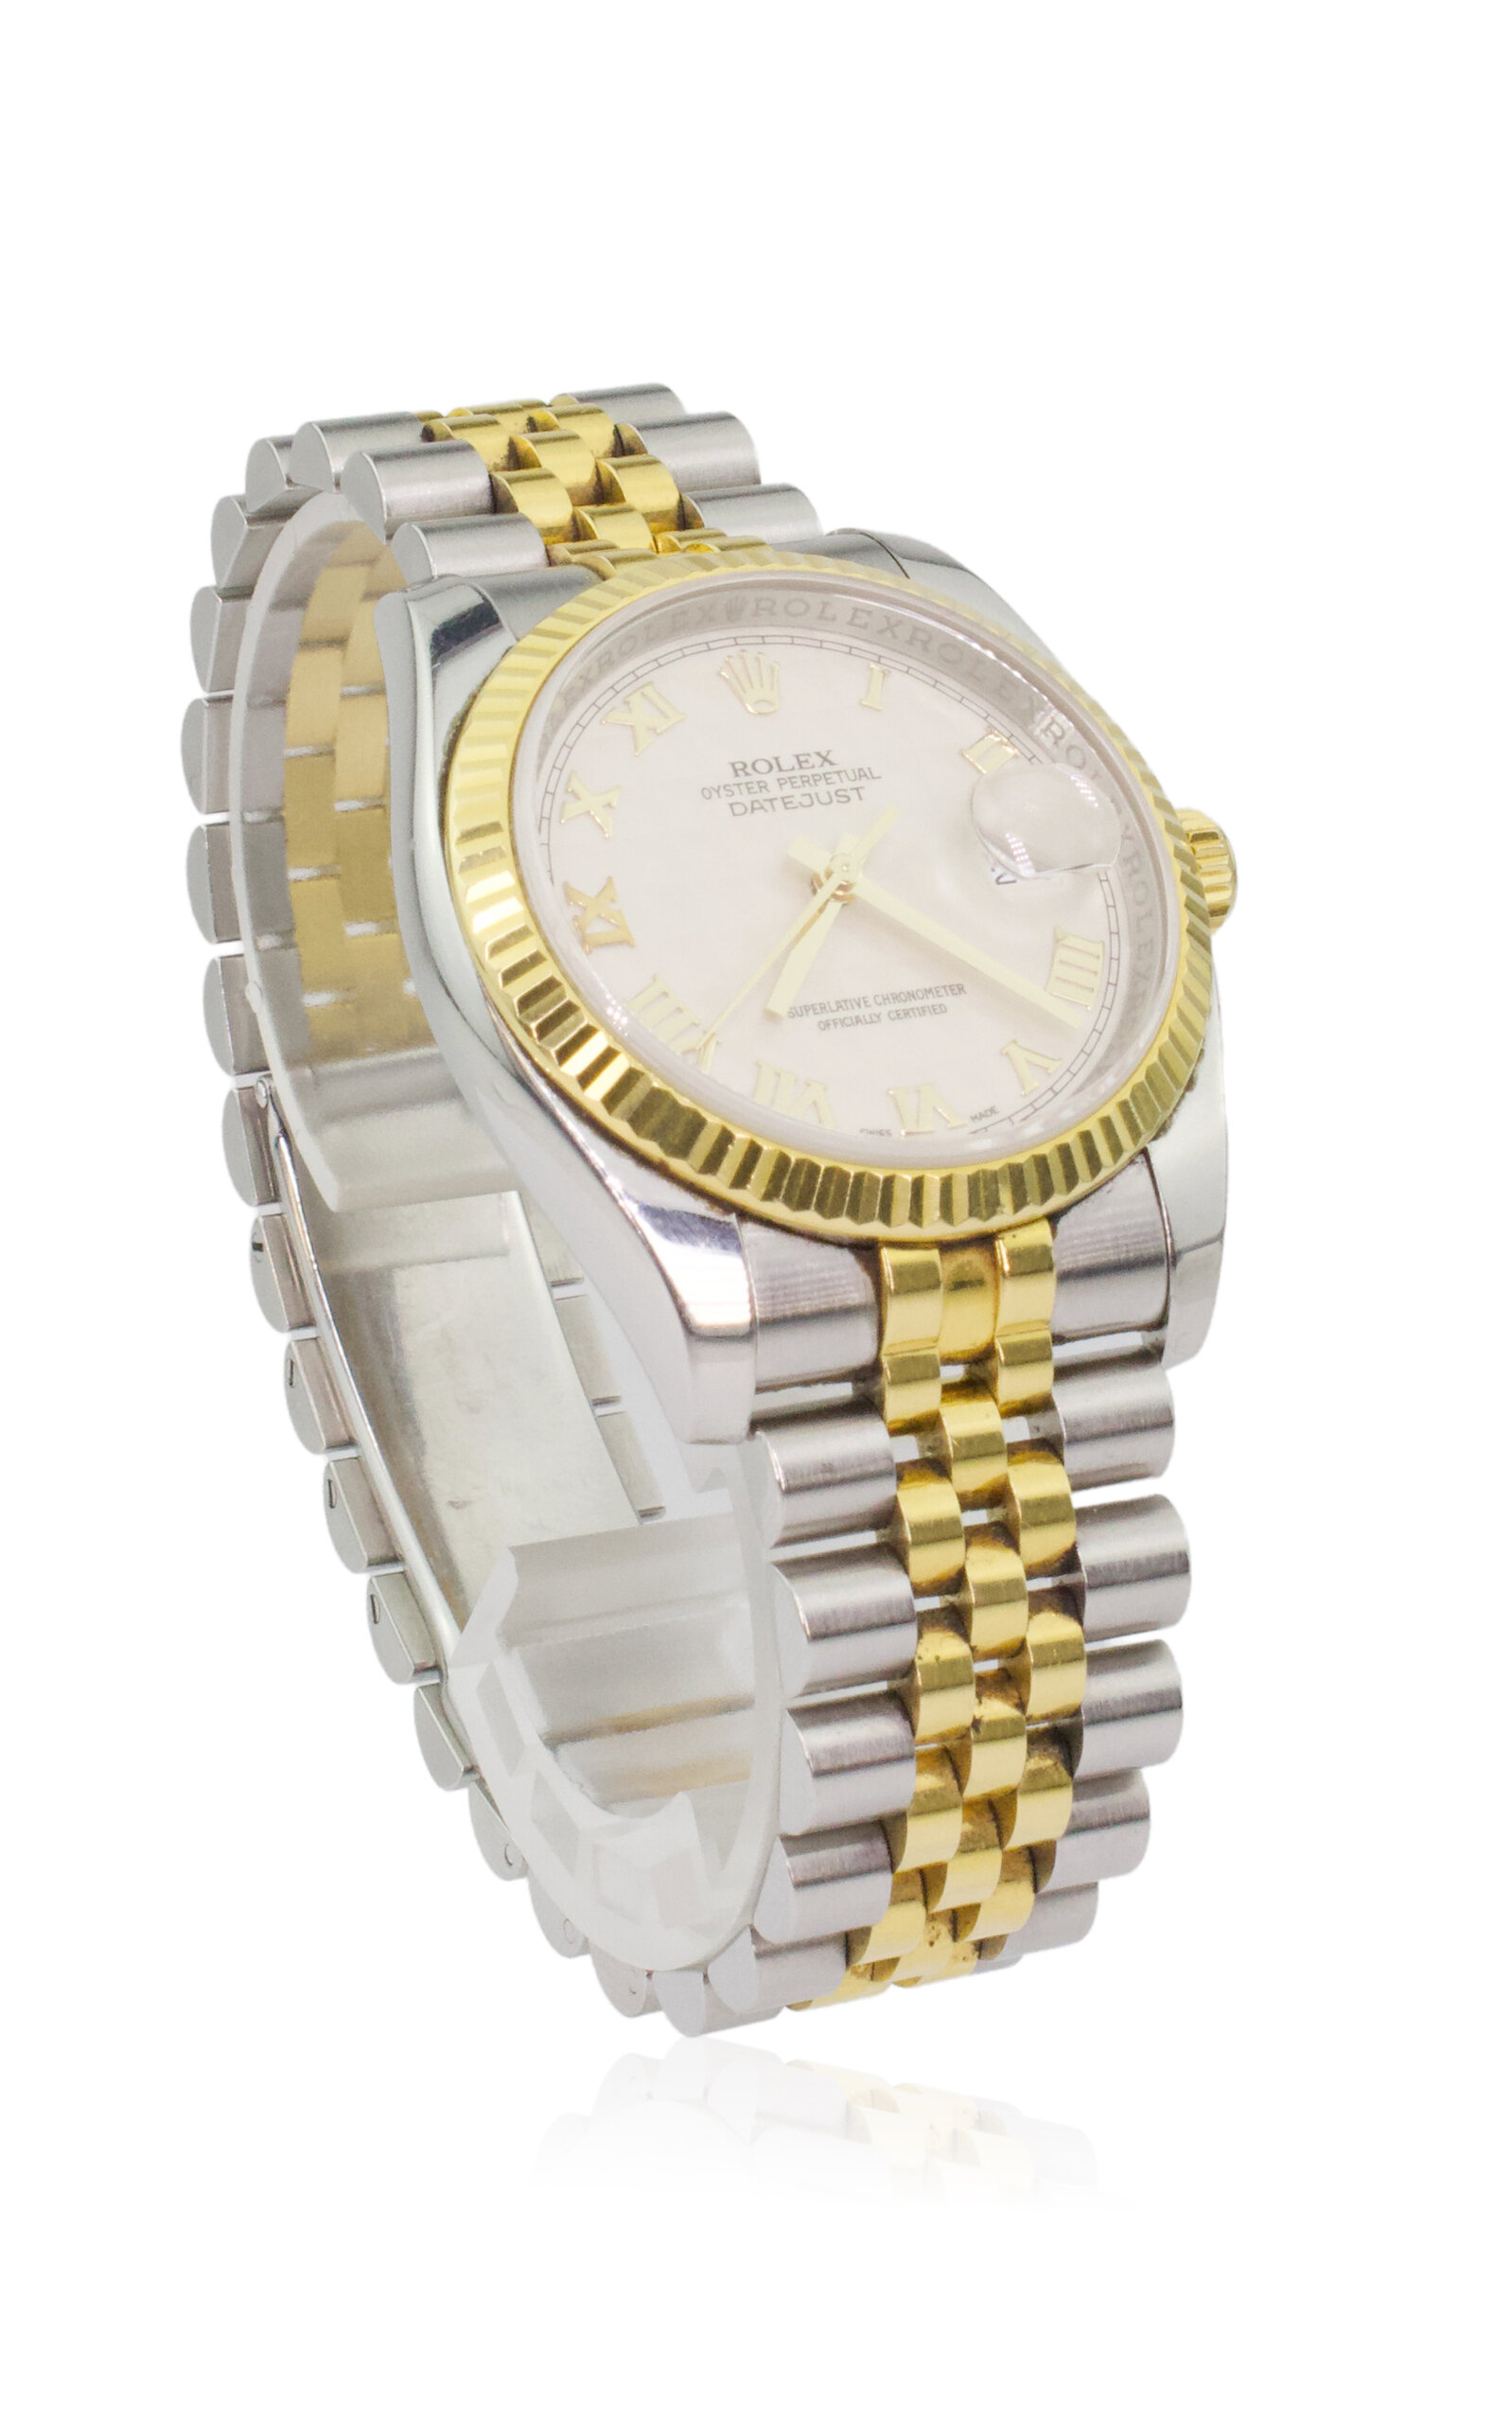 Private Label London Rolex Datejust Stainless Steel; 18k Yellow Gold Watch